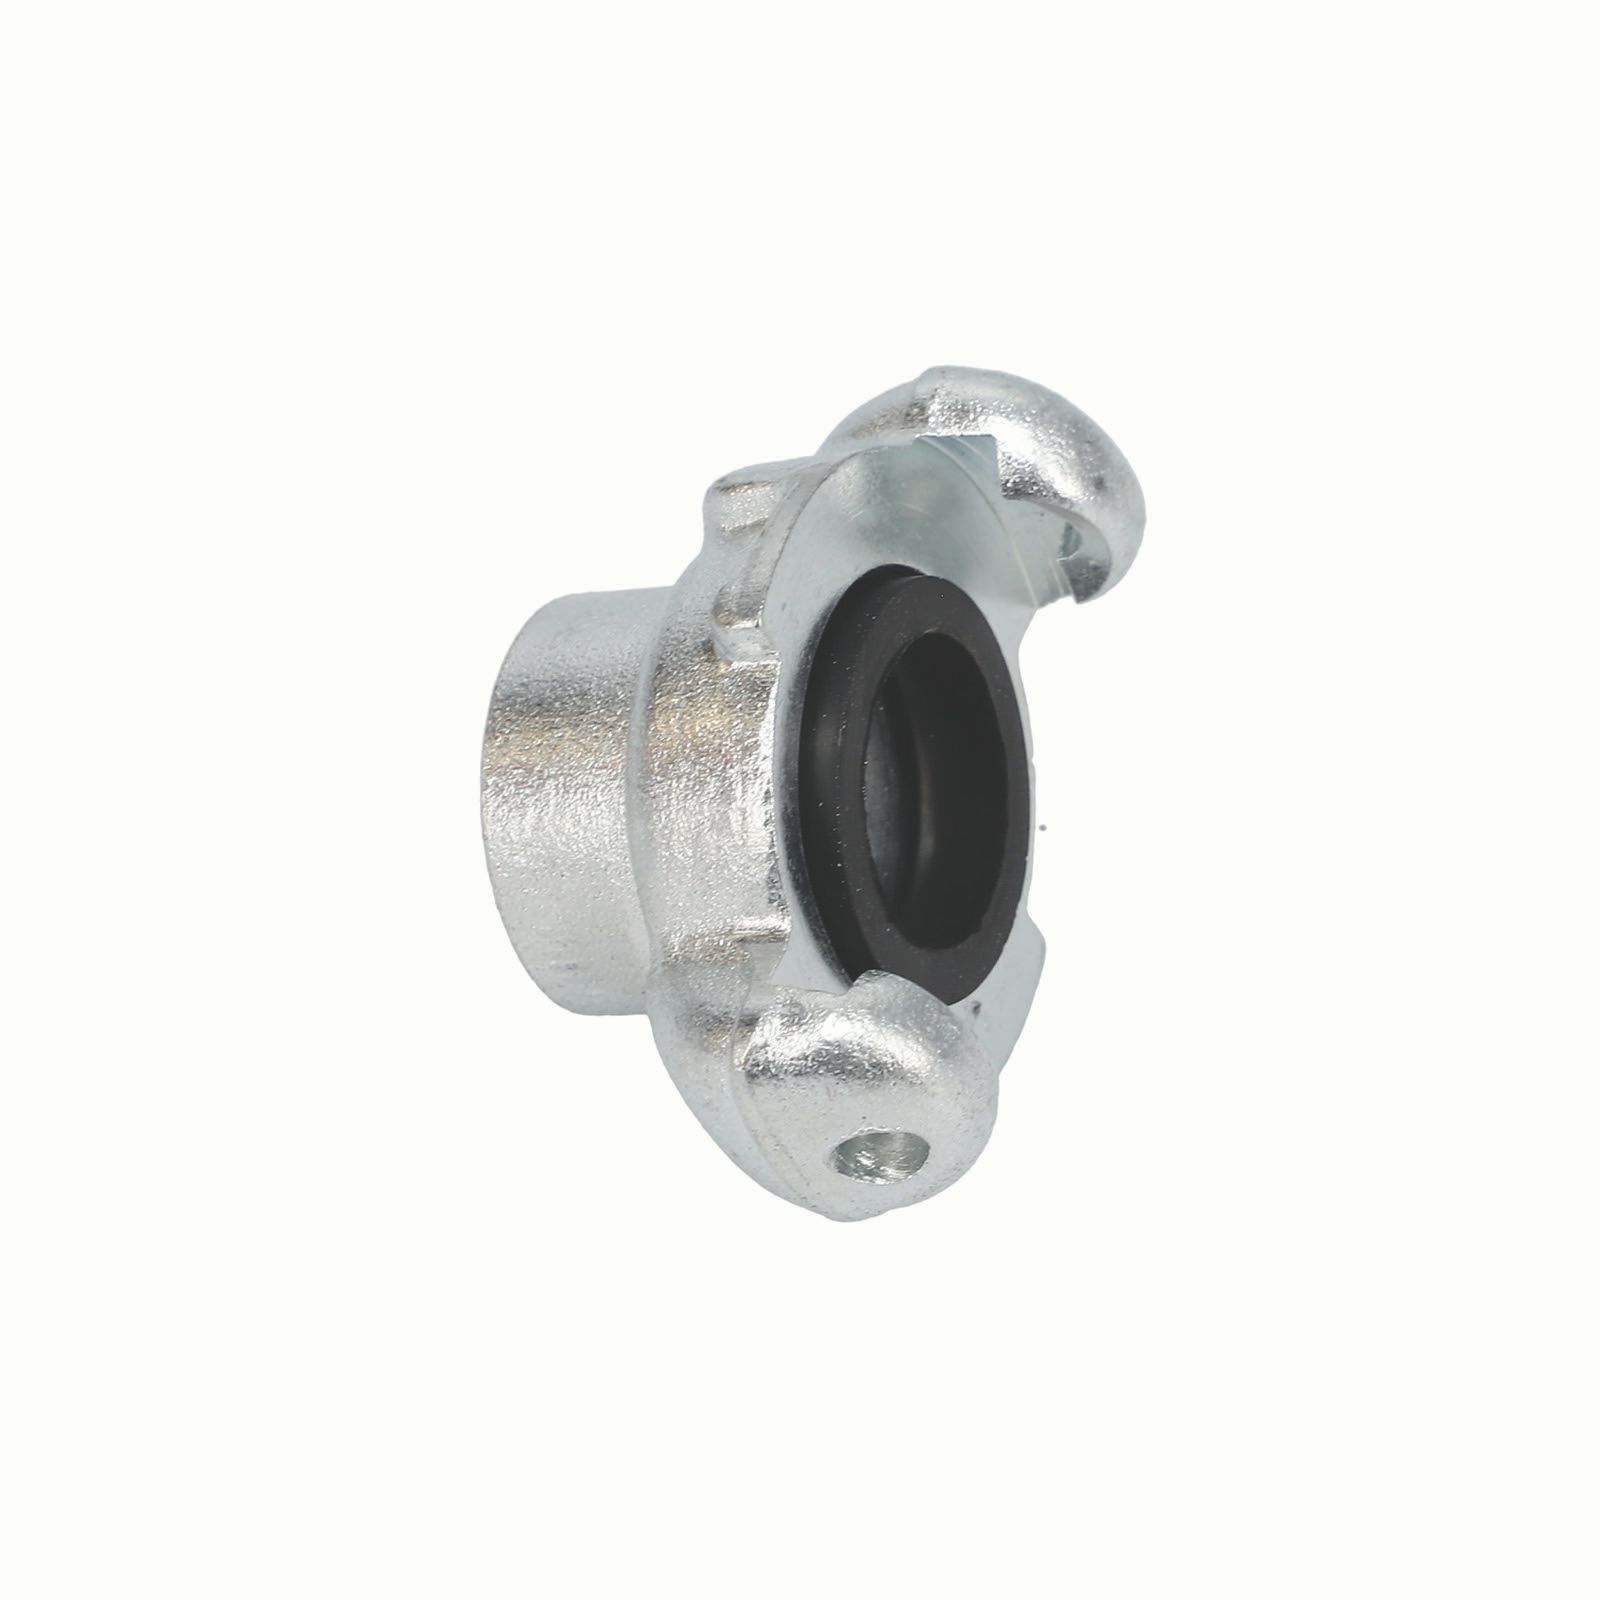 CLAW COUPLING product photo